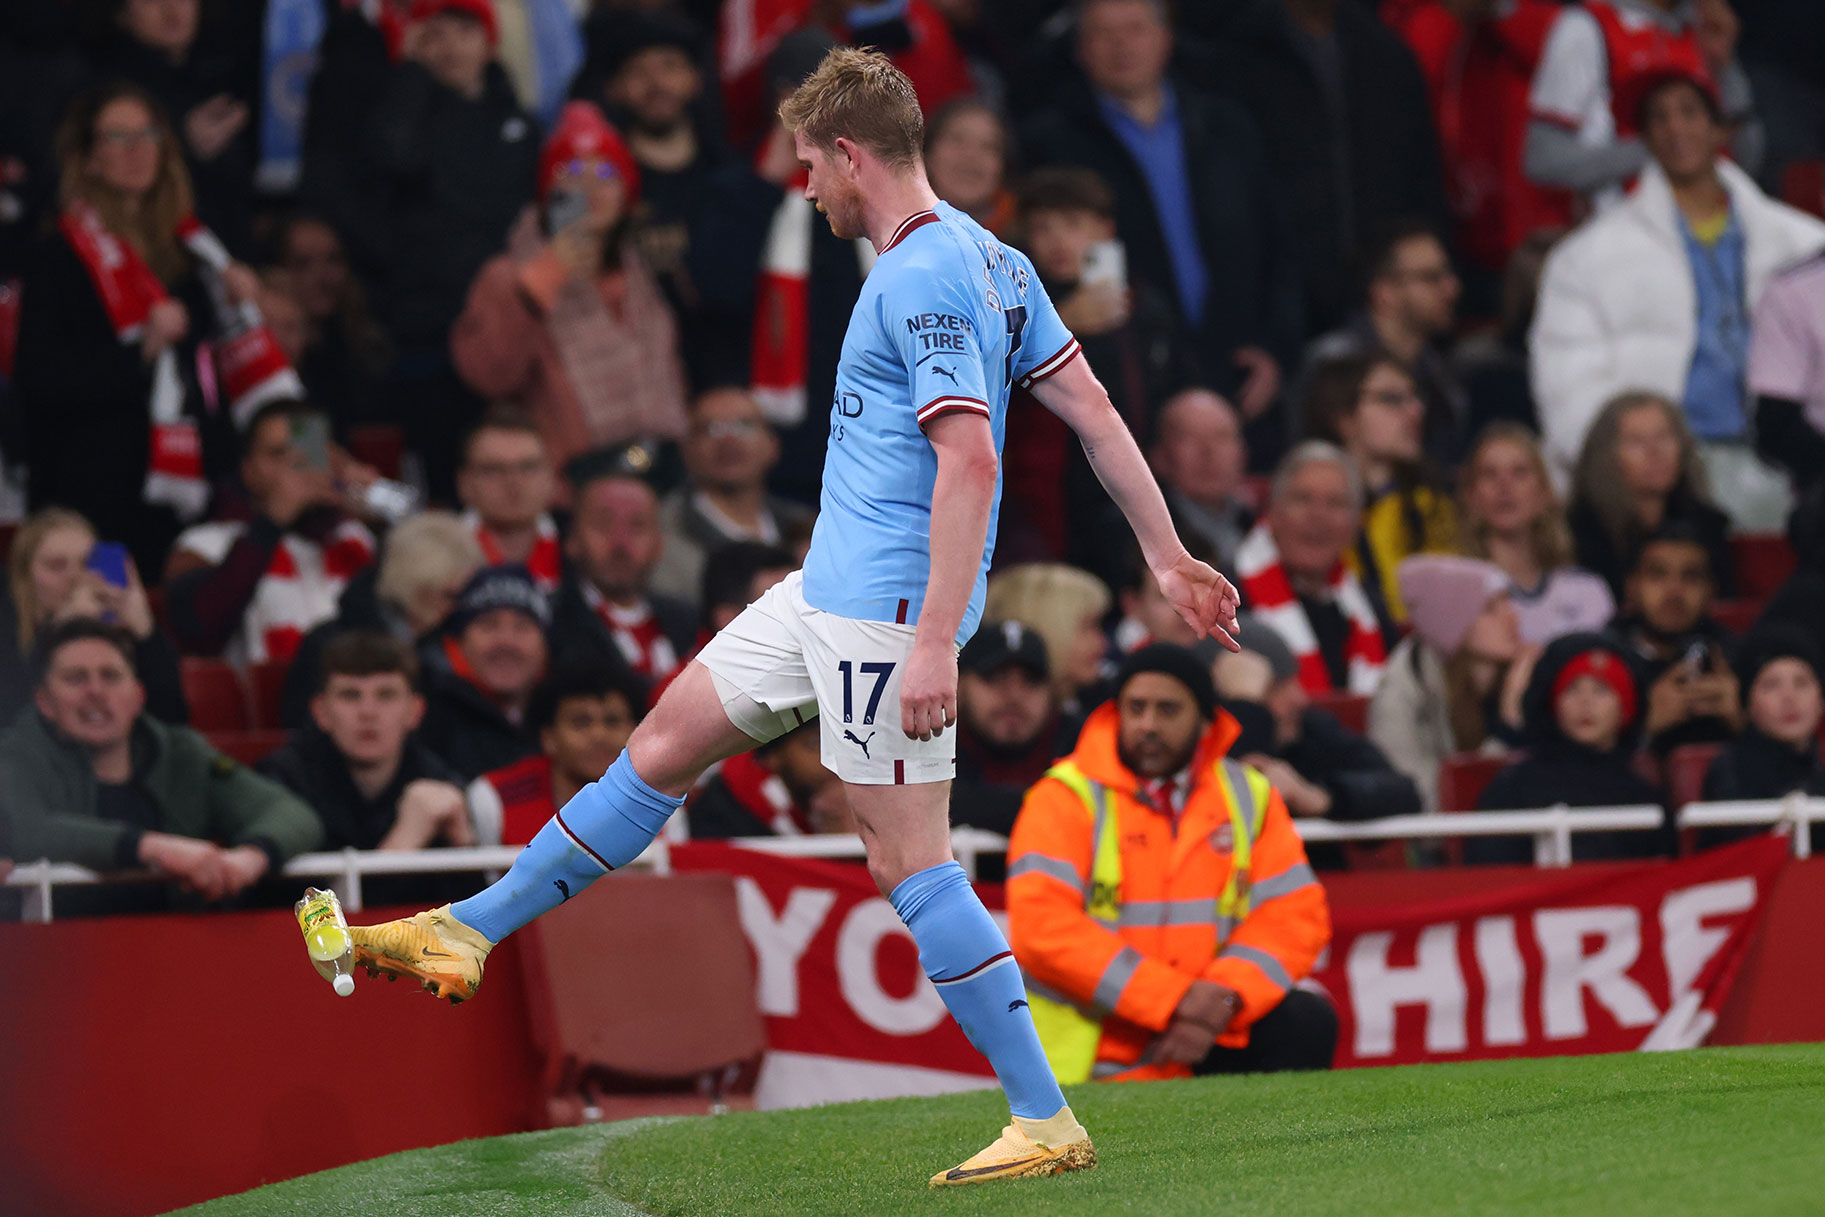 Kevin De Bruyne of Manchester City kicks away a bottle thrown from the crowd during the Premier League match between Arsenal FC and Manchester City at Emirates Stadium on February 15, 2023